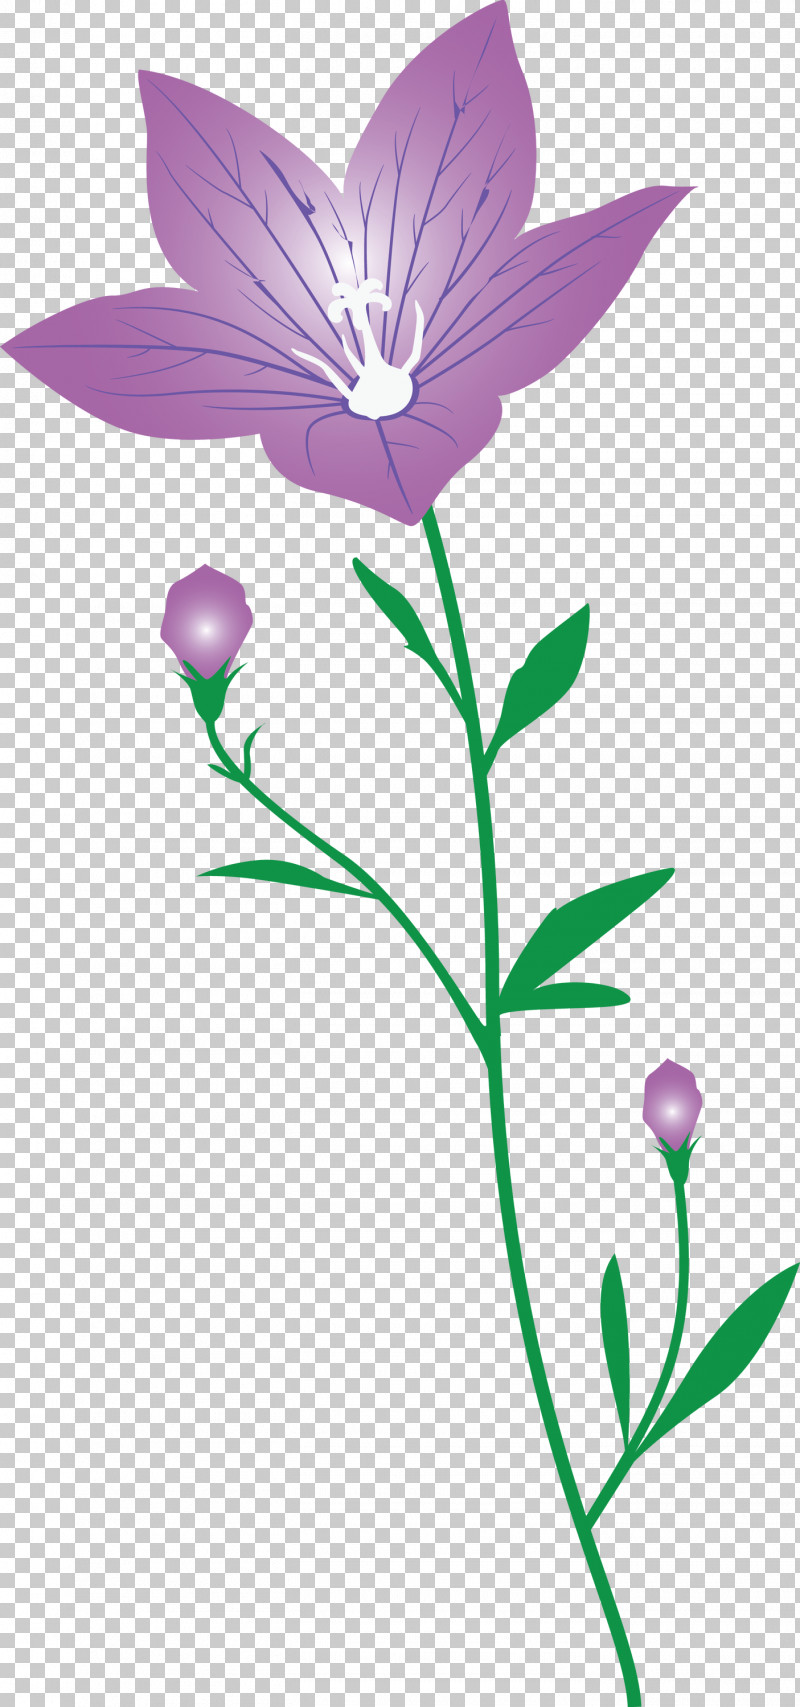 Balloon Flower PNG, Clipart, Balloon Flower, Branching, Flora, Flower, Herbaceous Plant Free PNG Download